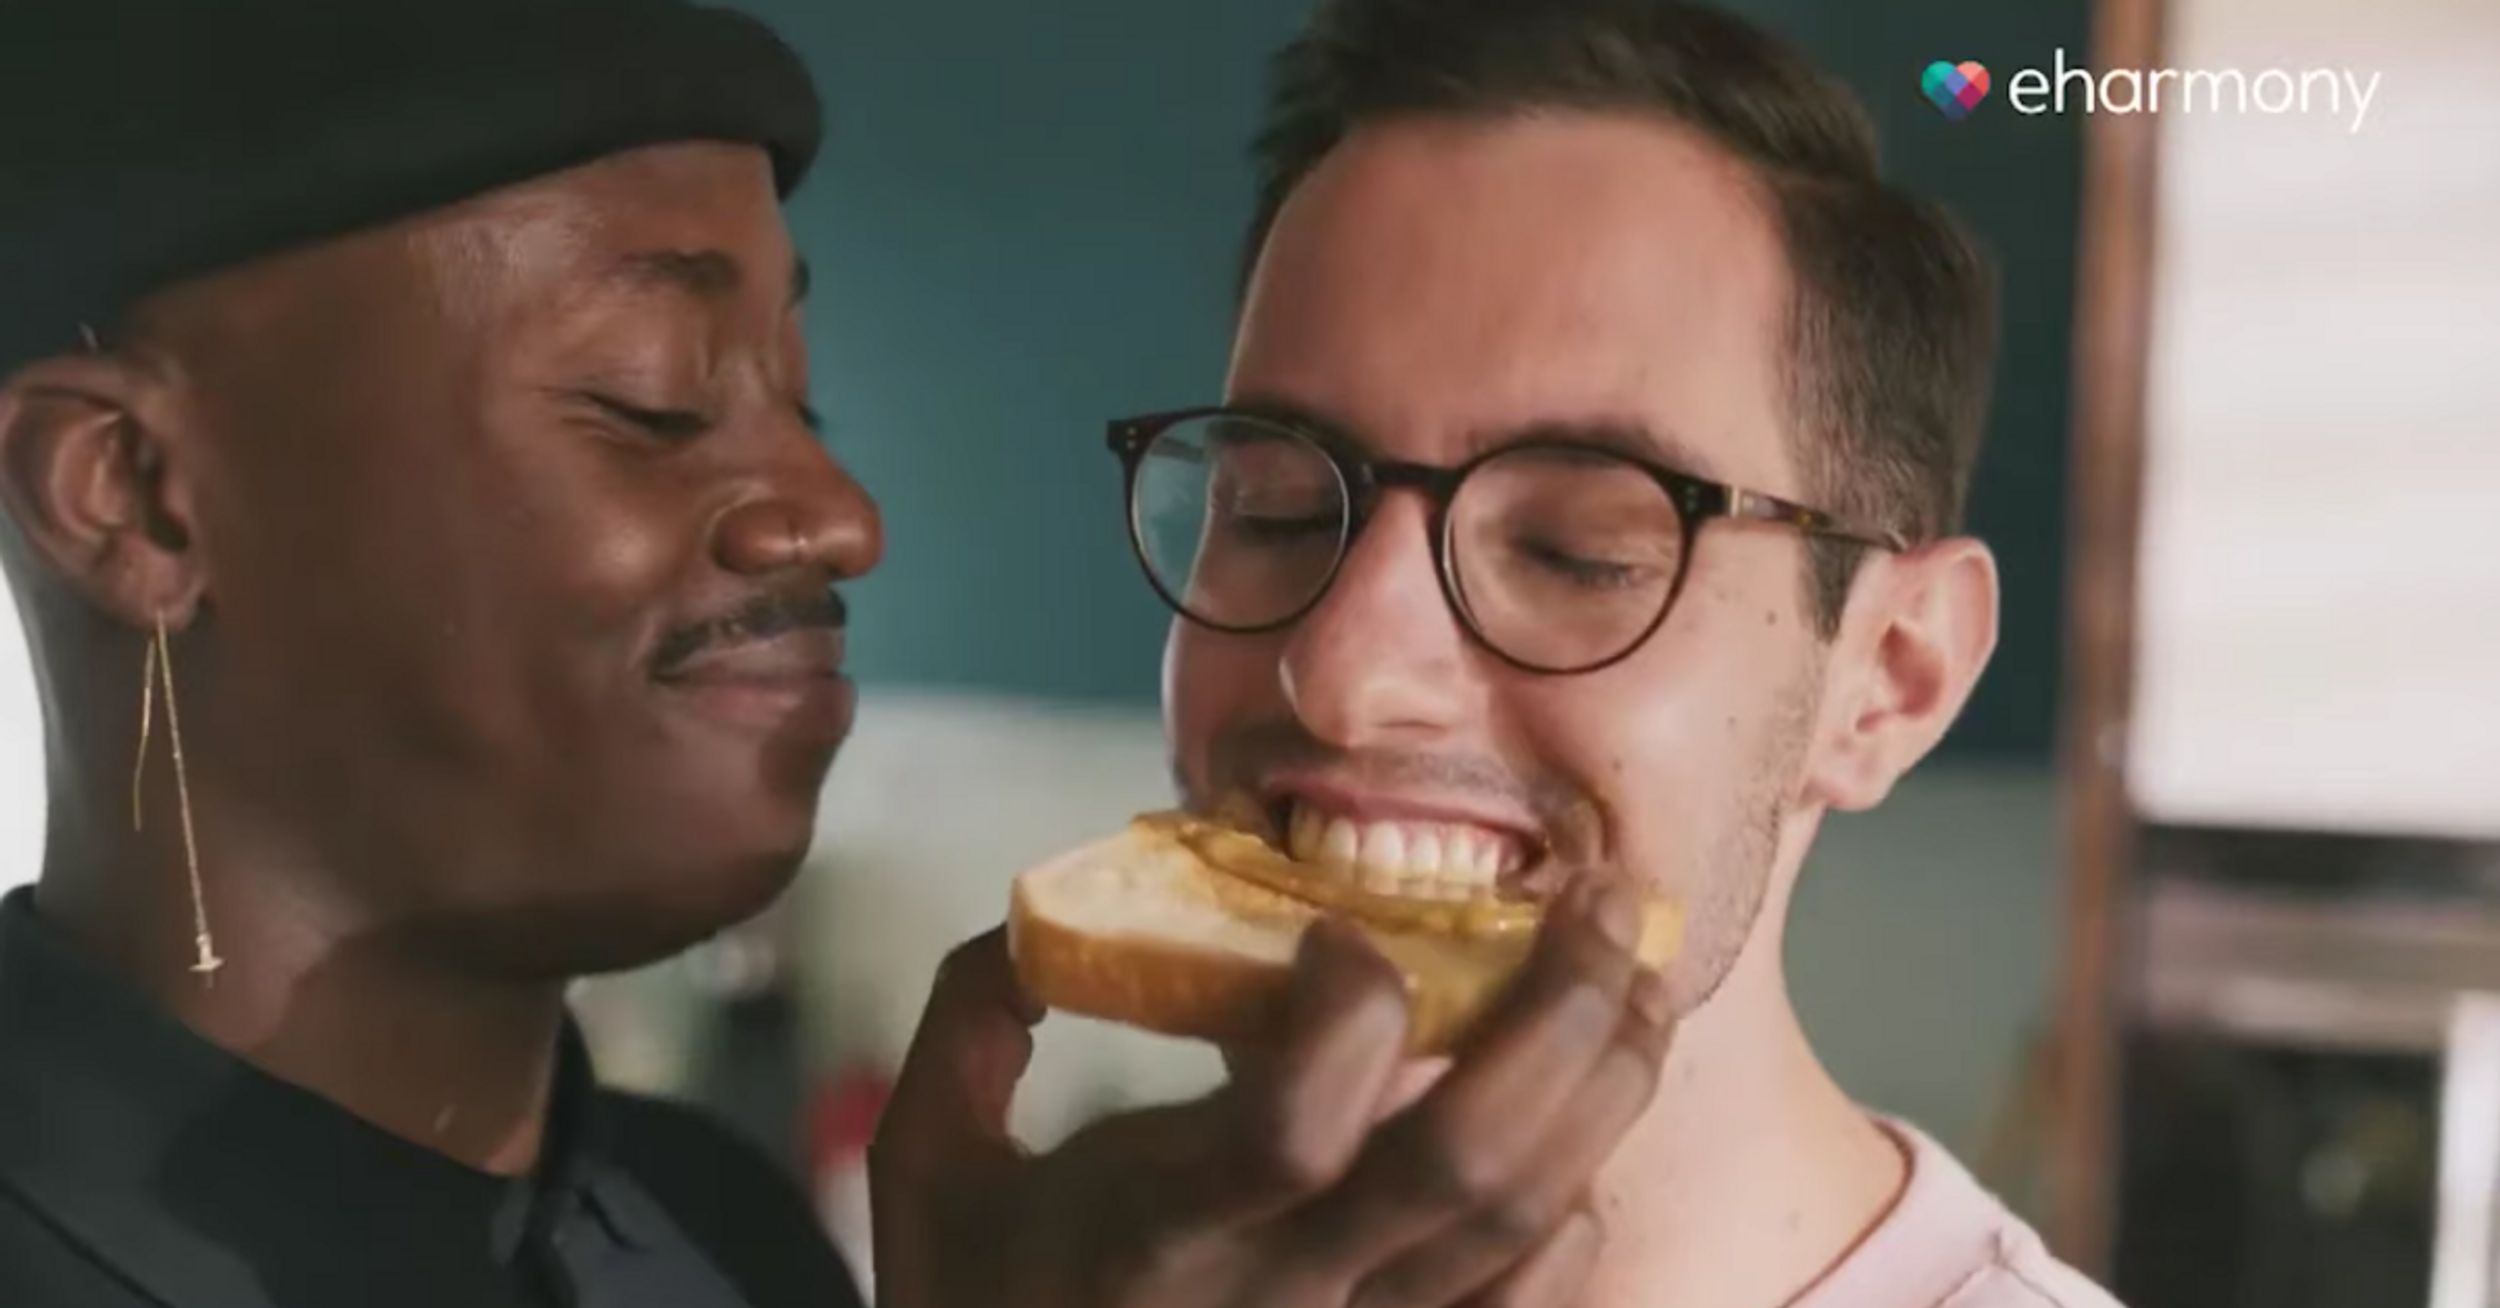 'One Million Moms' Melts Down Over Ad Featuring Gay Men Hugging And Eating Bread With Peanut Butter